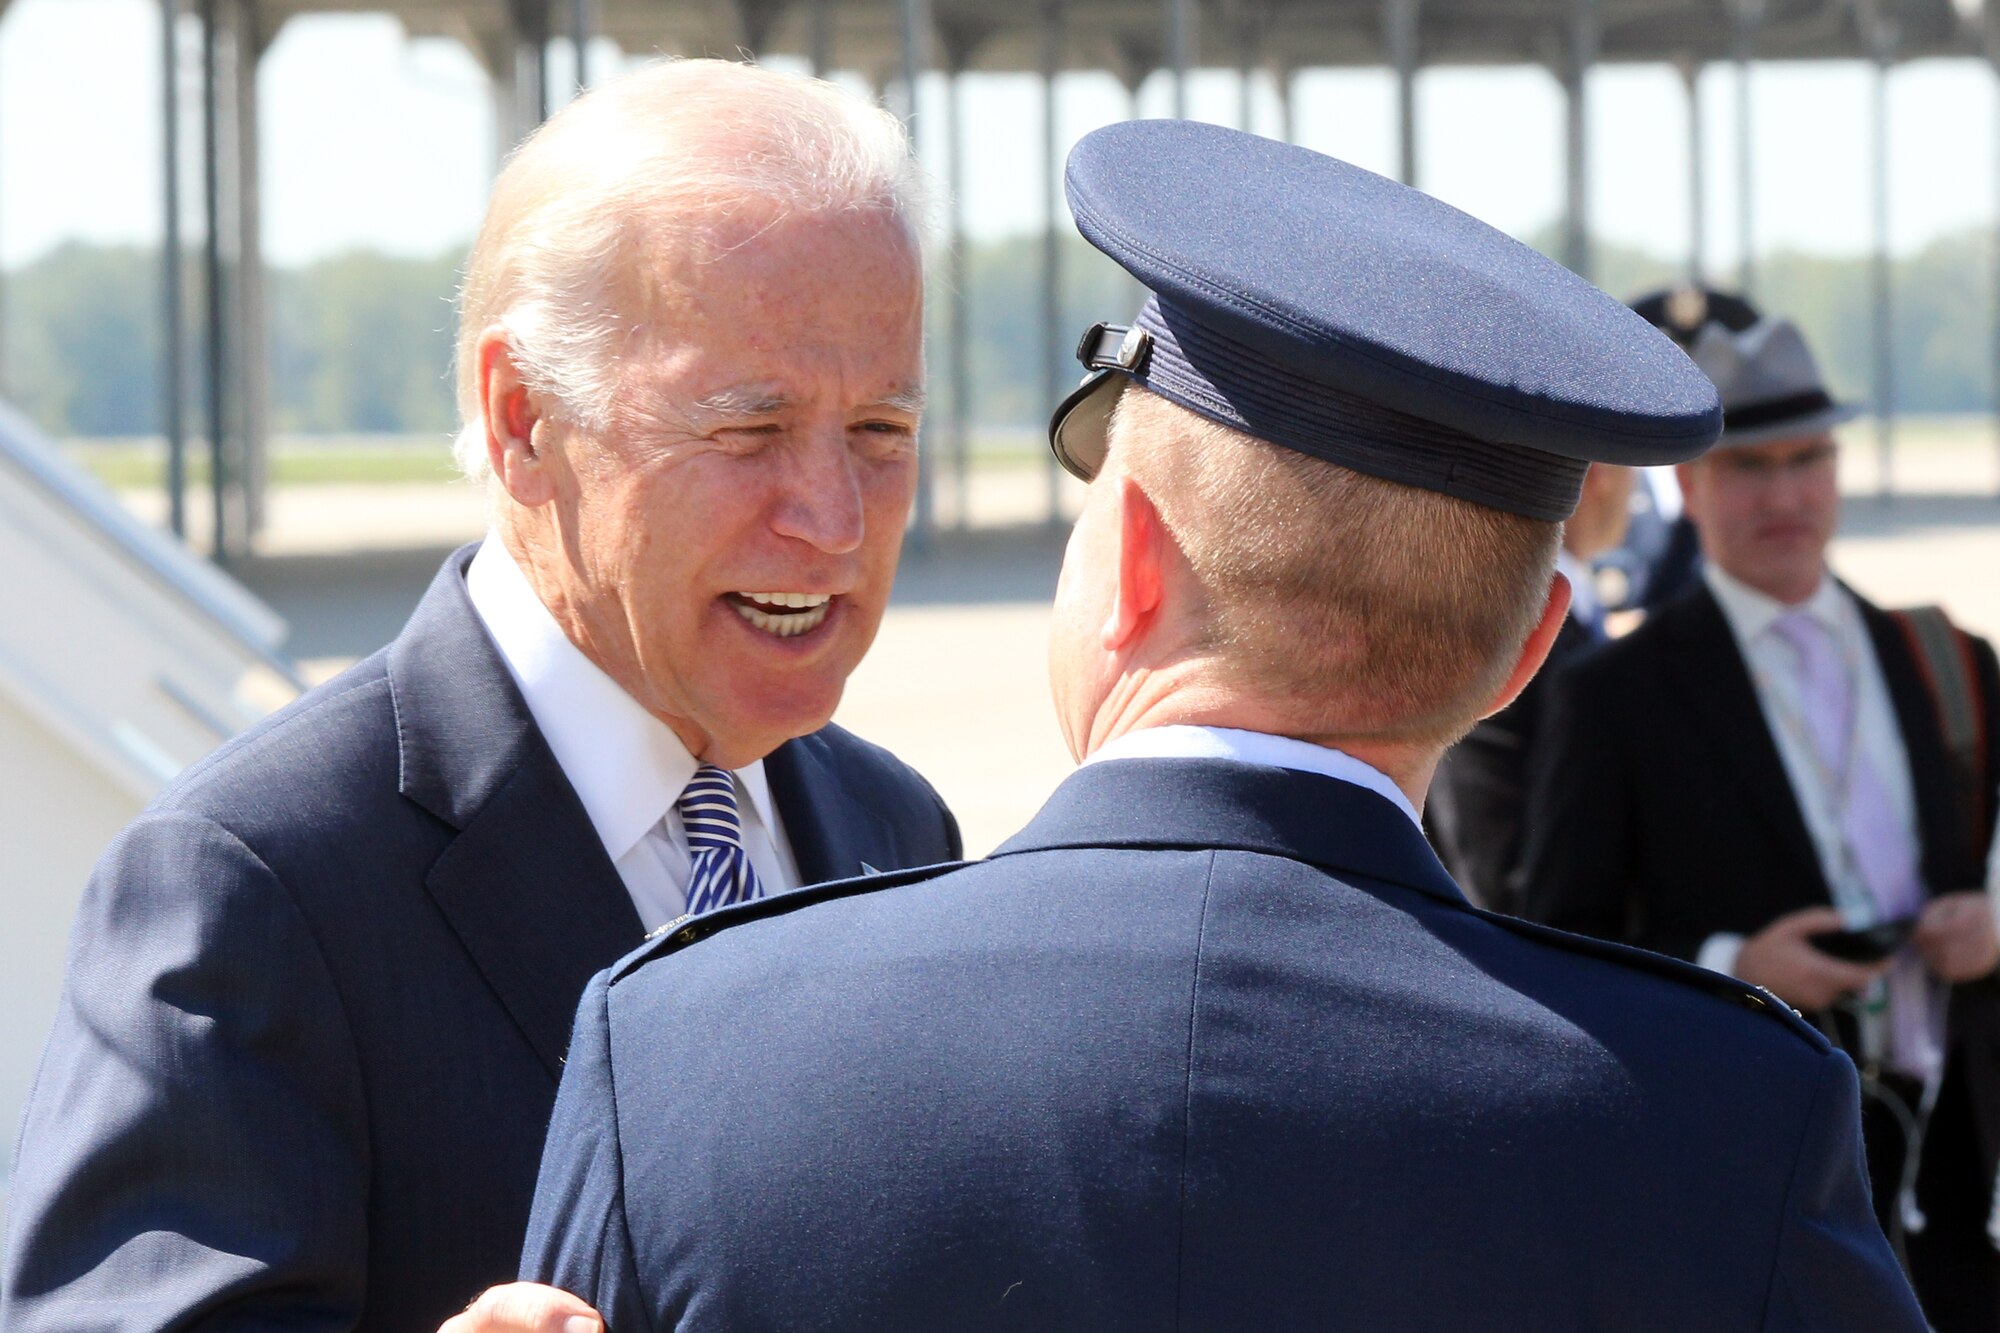 Vice President Joe Biden talks with Col. Rolf Mammen, 127th Wing vice commander, moments after landing at Selfridge Air National Guard Base, Mich., in Air Force Two Sept. 17, 2015. The vice president spoke at a mass transit event later in the day in Detroit. Biden’s visit came just a week after a visit to Selfridge by President Barack Obama and two weeks after a seven member Congressional delegation toured the base. (U.S. Air National Guard photo by Tech. Sgt. Dan Heaton)